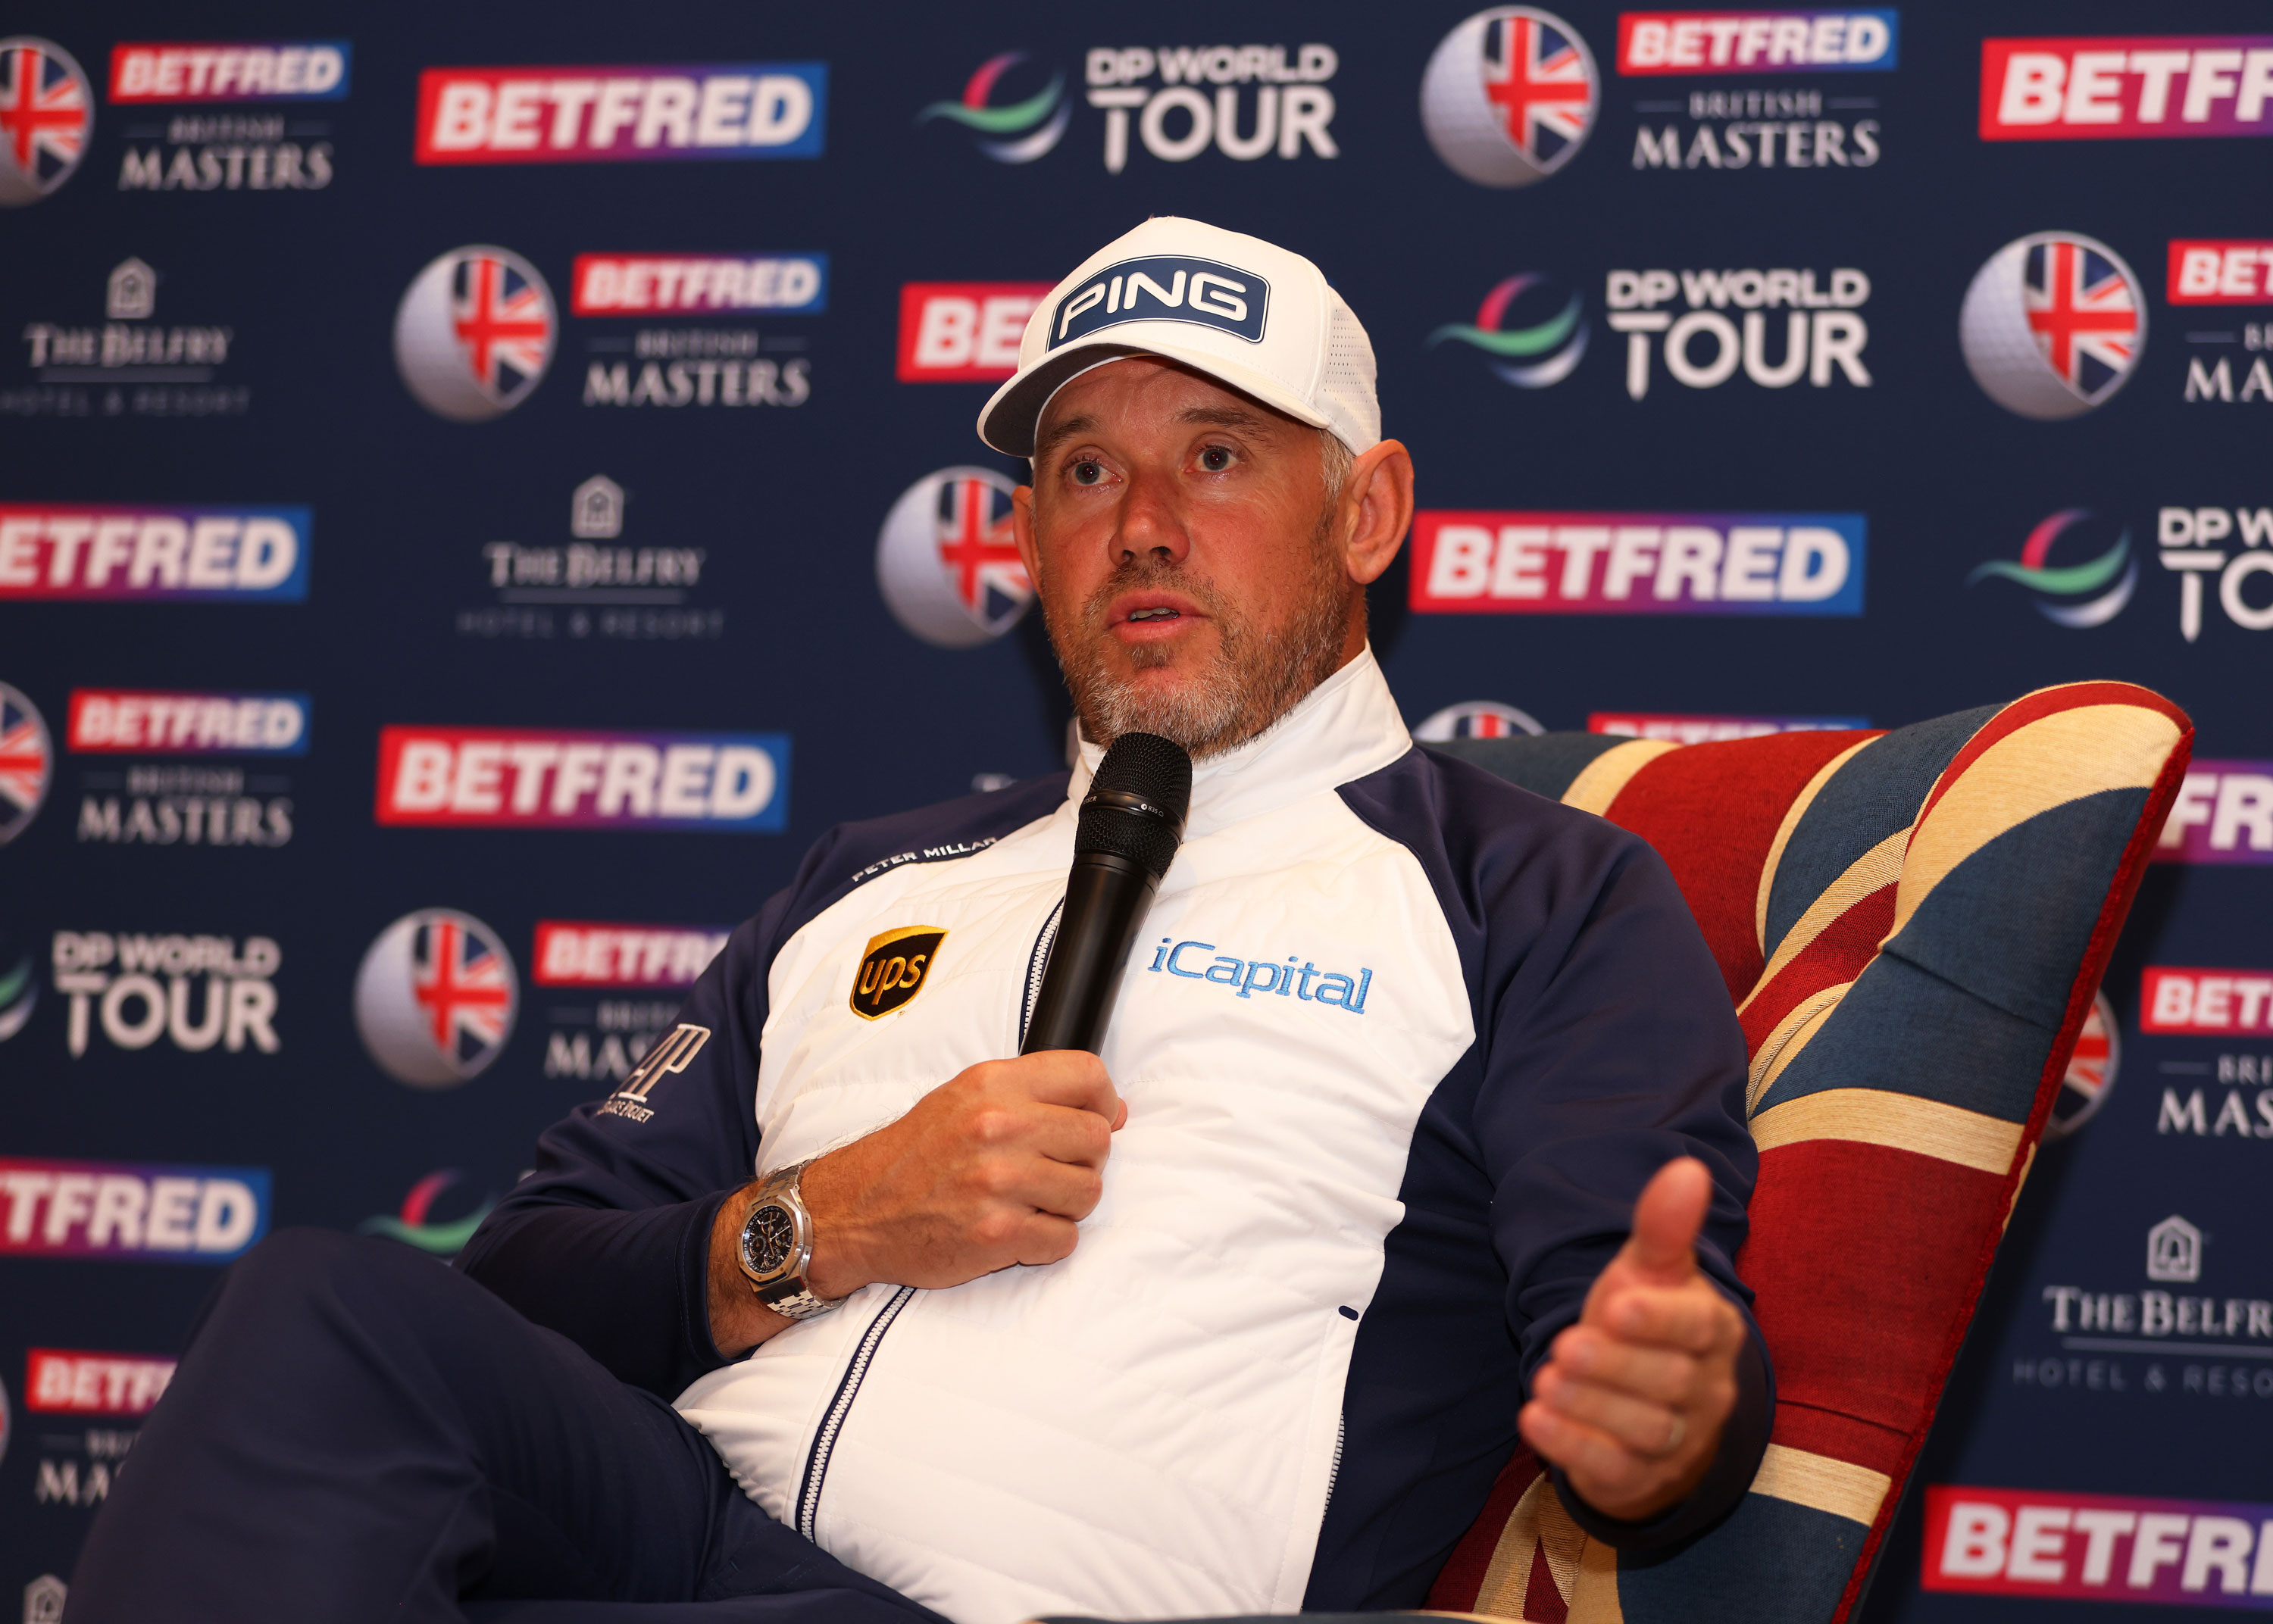 Lee Westwood makes official his long-assumed interest in playing in LIV Golf events Golf News and Tour Information GolfDigest